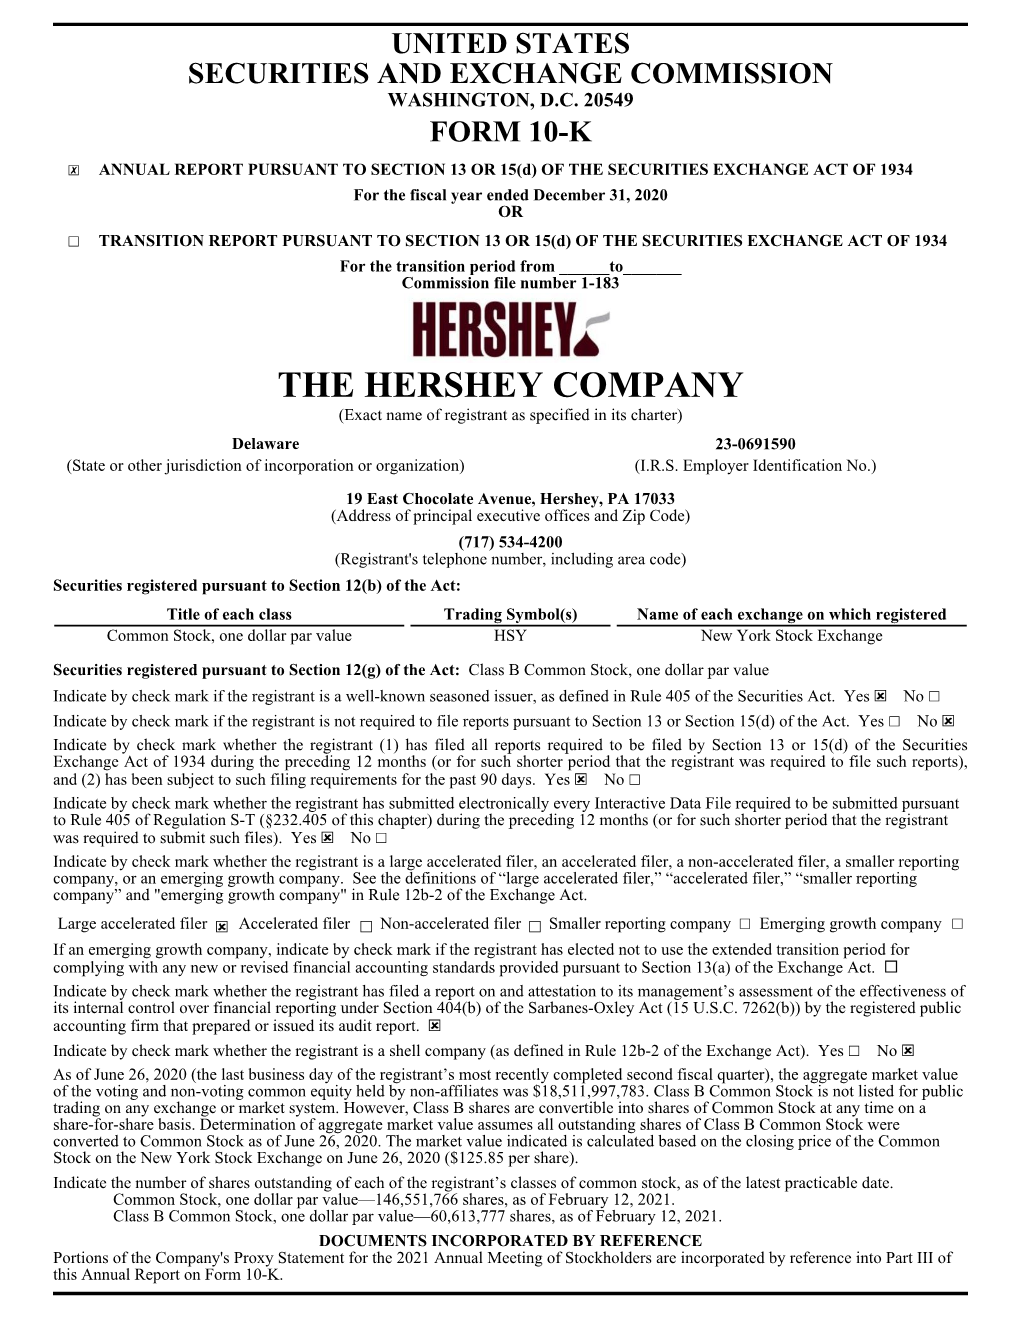 THE HERSHEY COMPANY (Exact Name of Registrant As Specified in Its Charter) Delaware 23-0691590 (State Or Other Jurisdiction of Incorporation Or Organization) (I.R.S